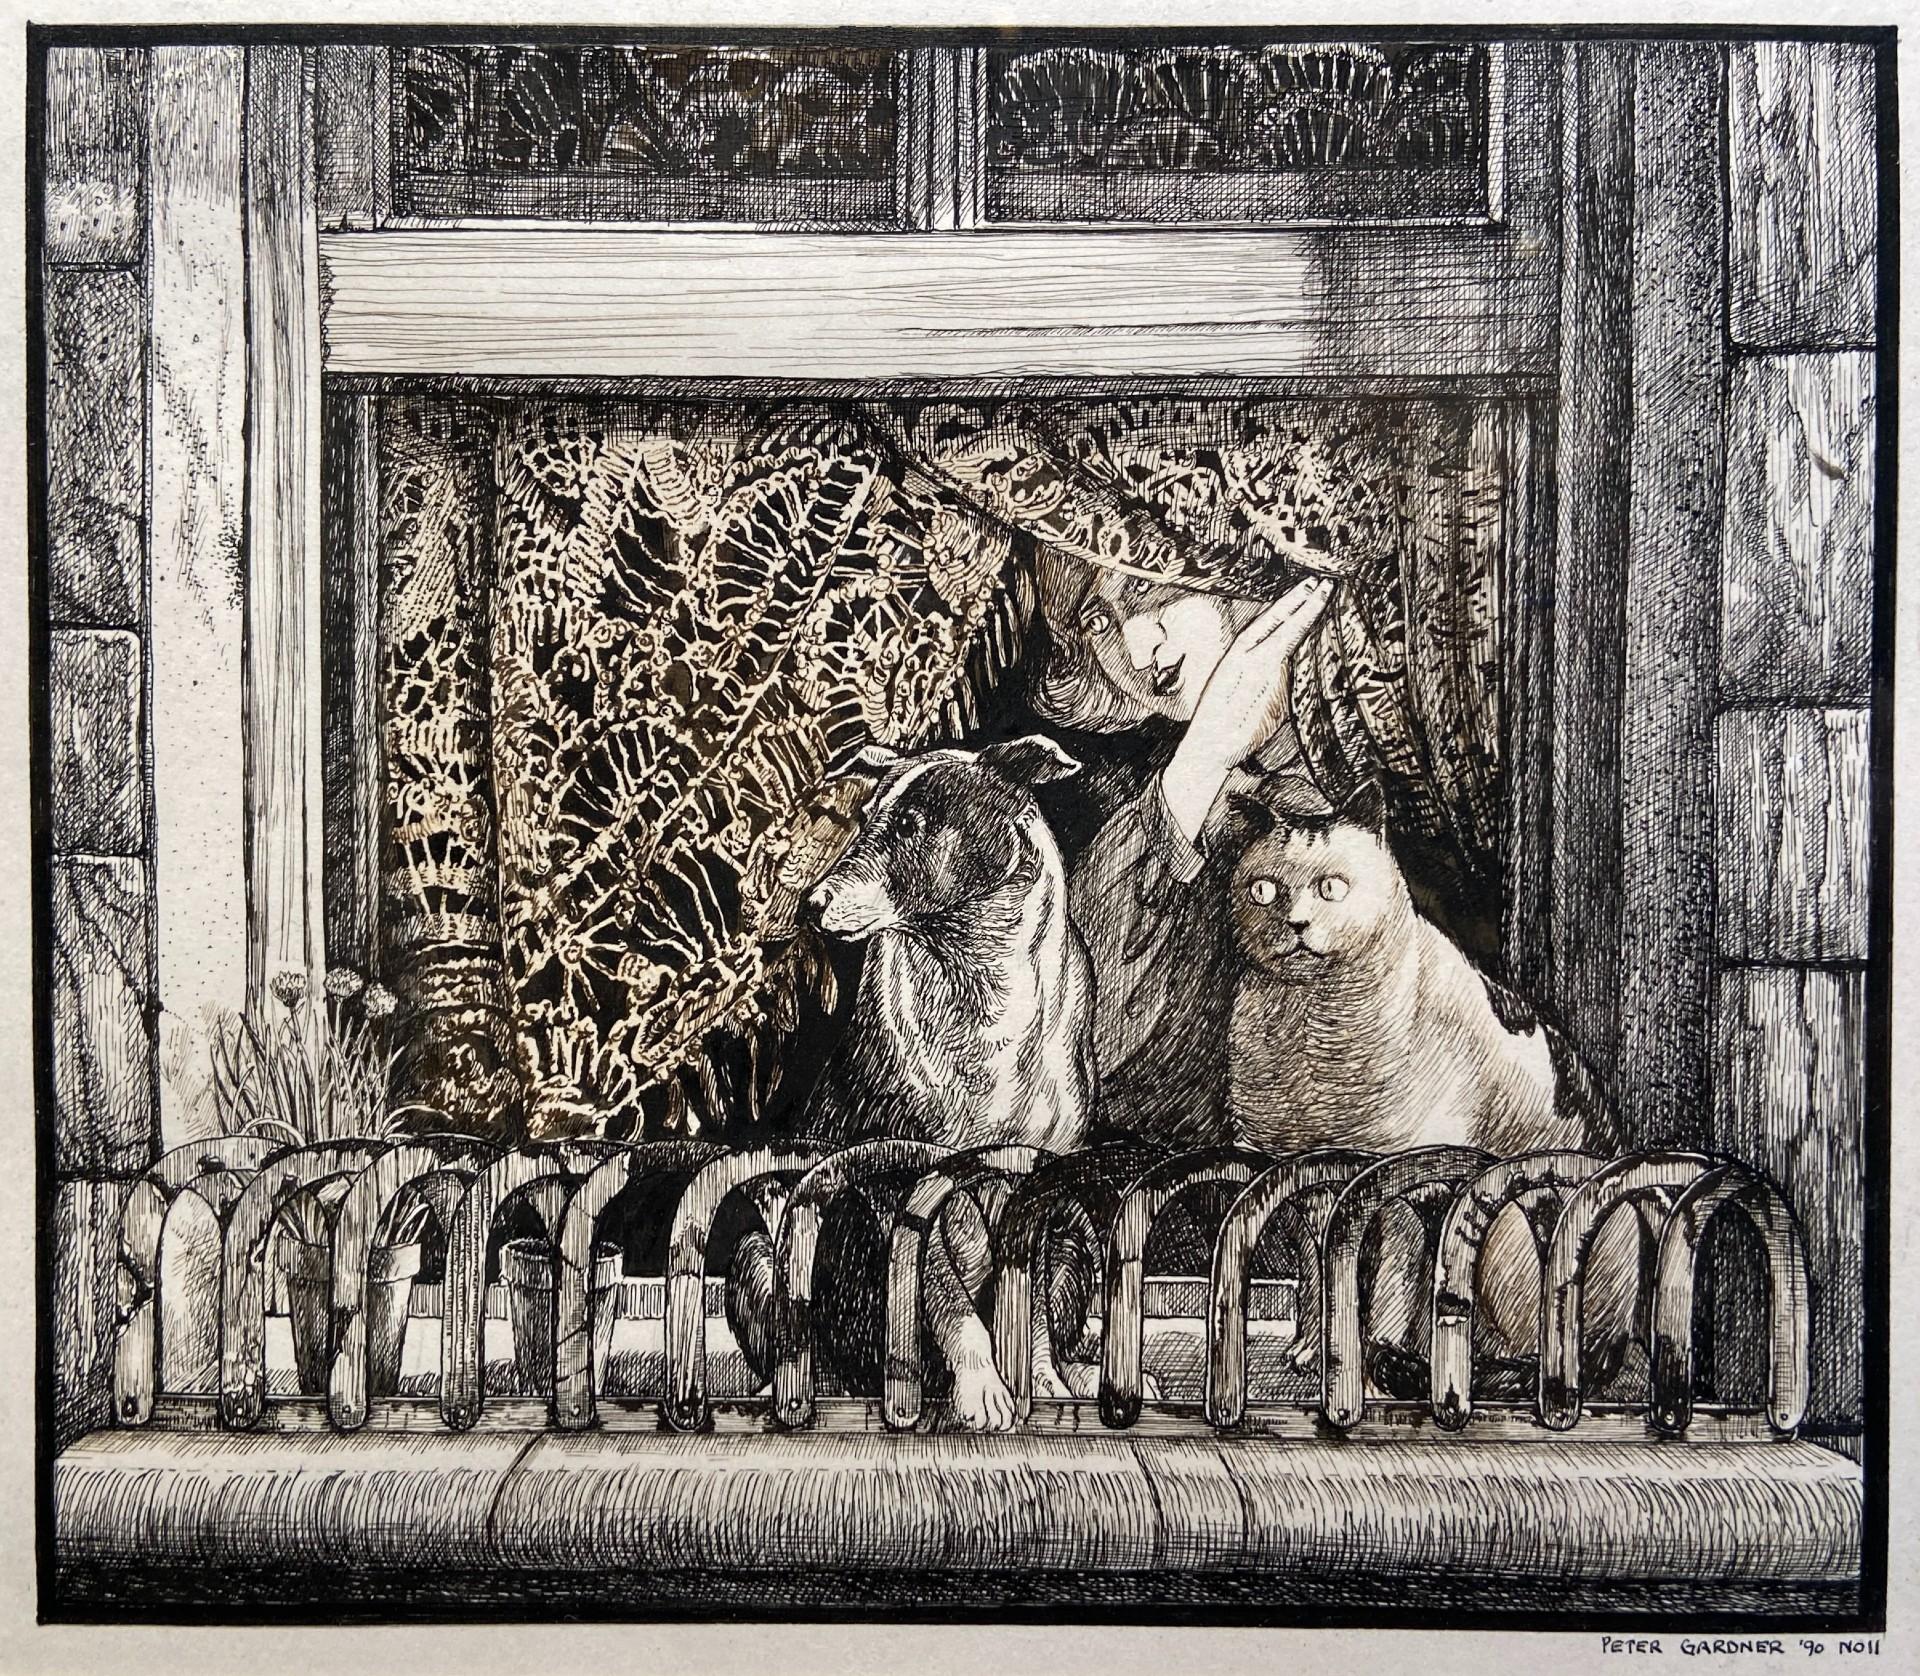 The Watchers, Pen and Ink Drawing, 20th Century British School, Signed 1990